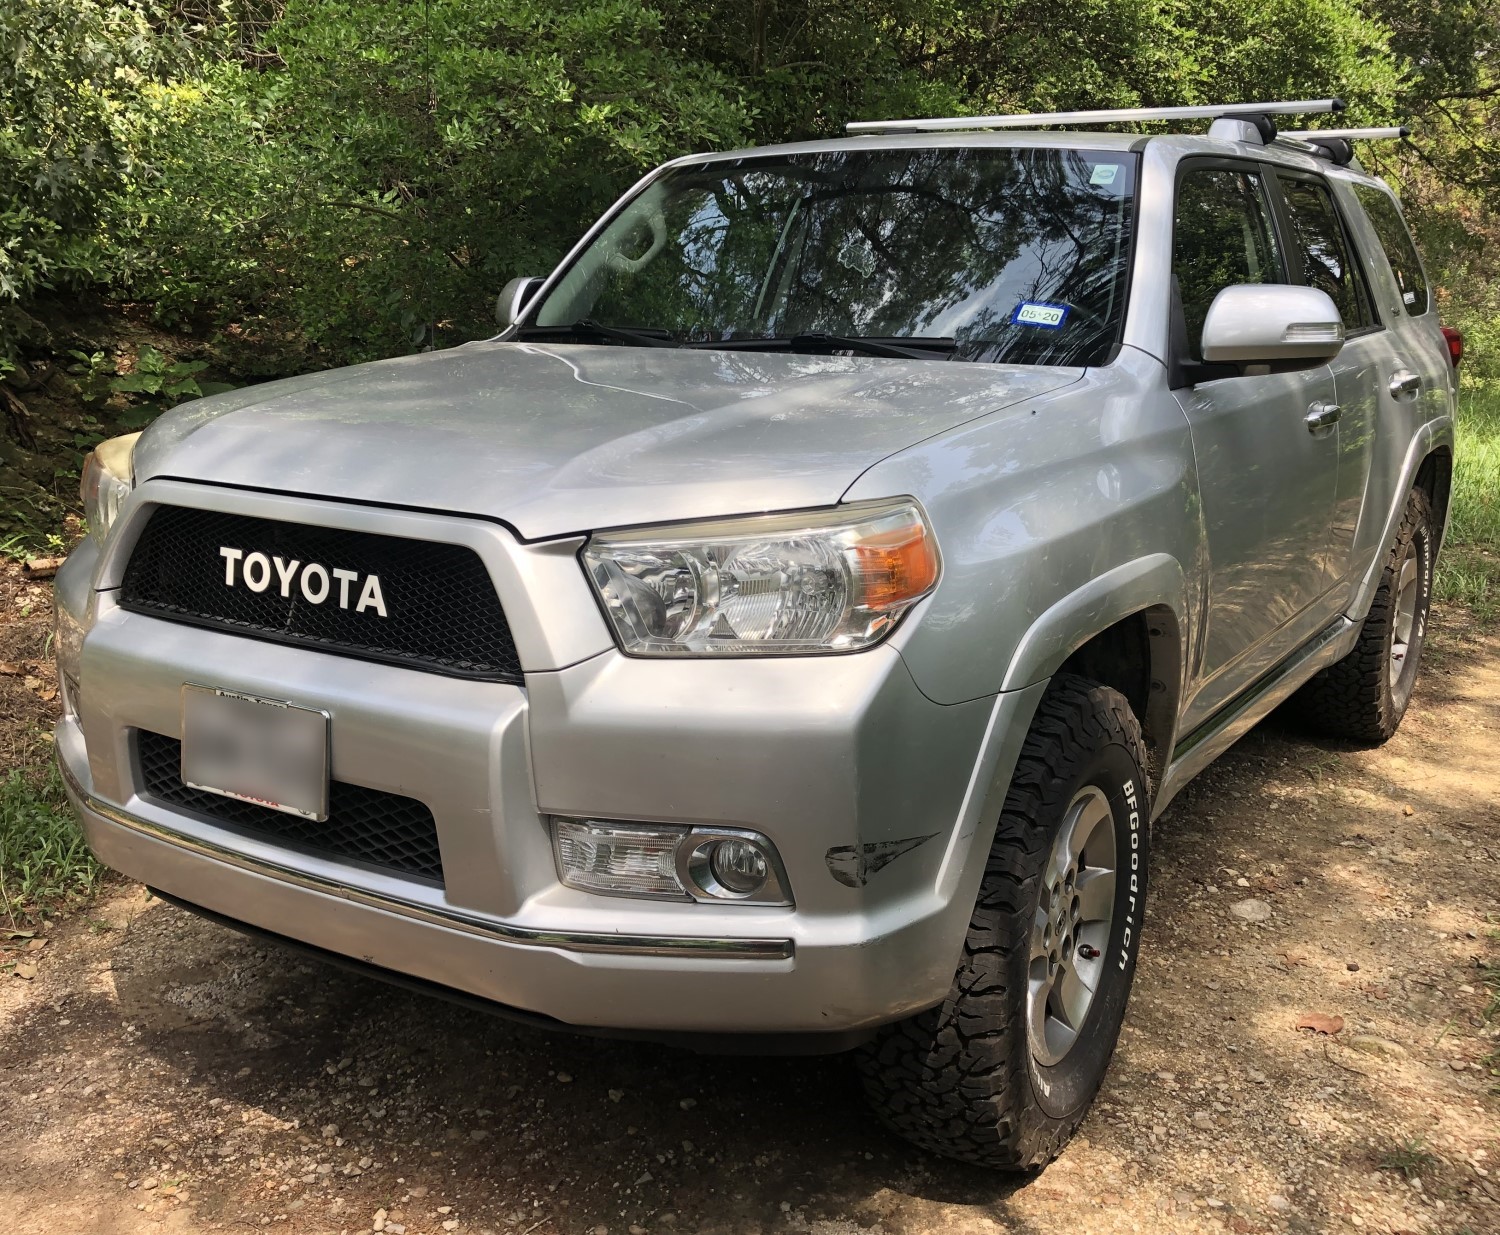 2010 - 2013 Toyota 4Runner Grill Mesh and Toyota Emblem #2